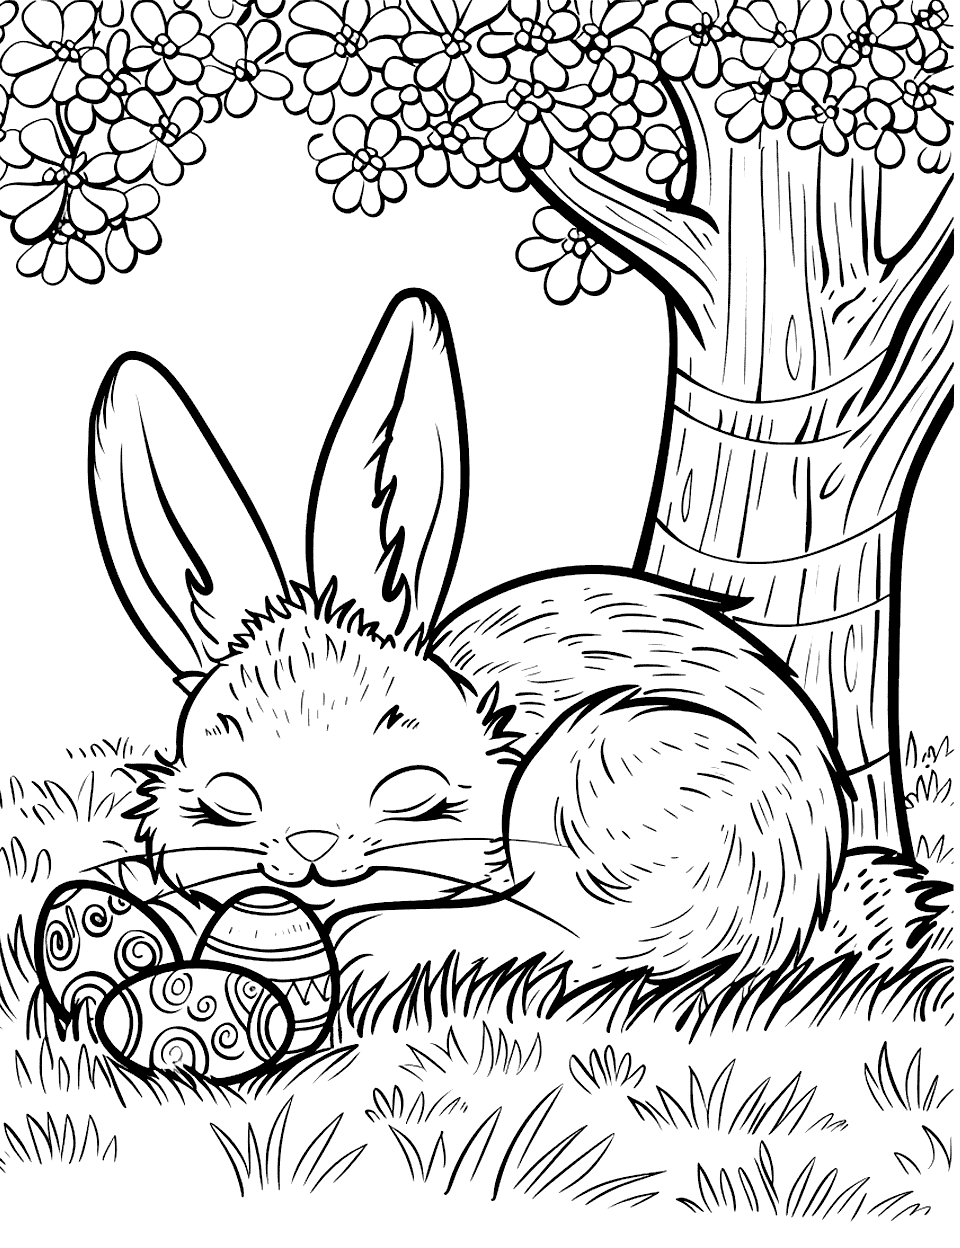 Cozy Bunny Nap Easter Coloring Page - A bunny sleeping peacefully under a tree, with a few Easter eggs near it.